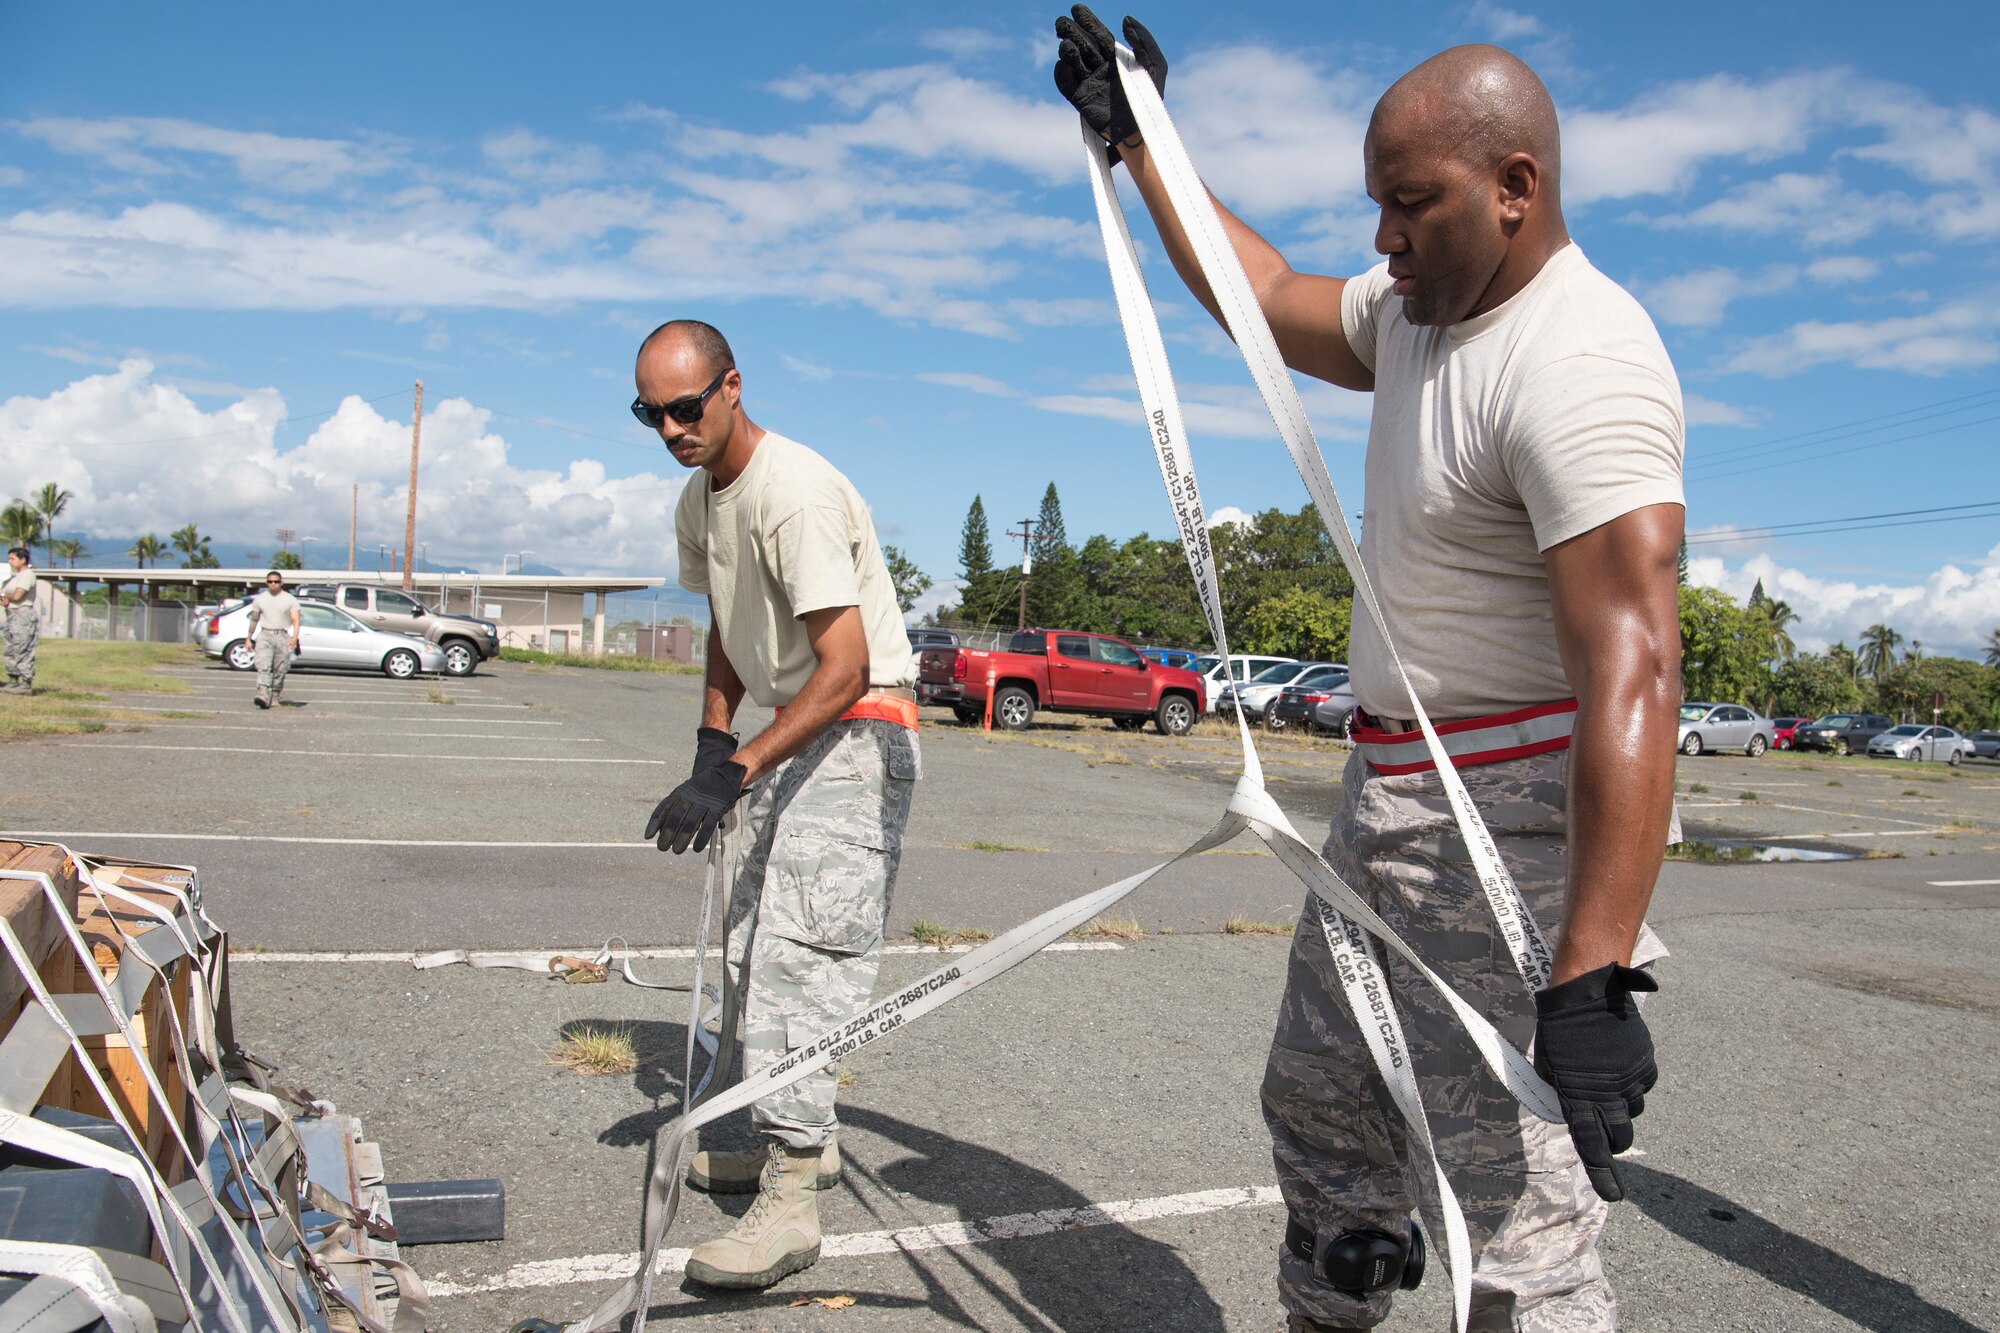 U.S. Air Force Tech. Sgt. Shane Costa and Staff Sgt. Osiris Terry, members of the Air Force Reserve’s 48th Aerial Port Squadron, strap down equipment during a pallet building training exercise designed to perfect their skills as air transportation specialists Oct. 13, 2018, at Joint Base Pearl Harbor-Hickam, Hawaii. The 48th APS, which is part of the 624th Regional Support Group, deploys qualified personnel to provide air terminal operations worldwide in support of contingency operations, exercises, unit moves, and foreign humanitarian relief or disaster operations. (U.S. Air Force photo by Master Sgt. Theanne Herrmann)